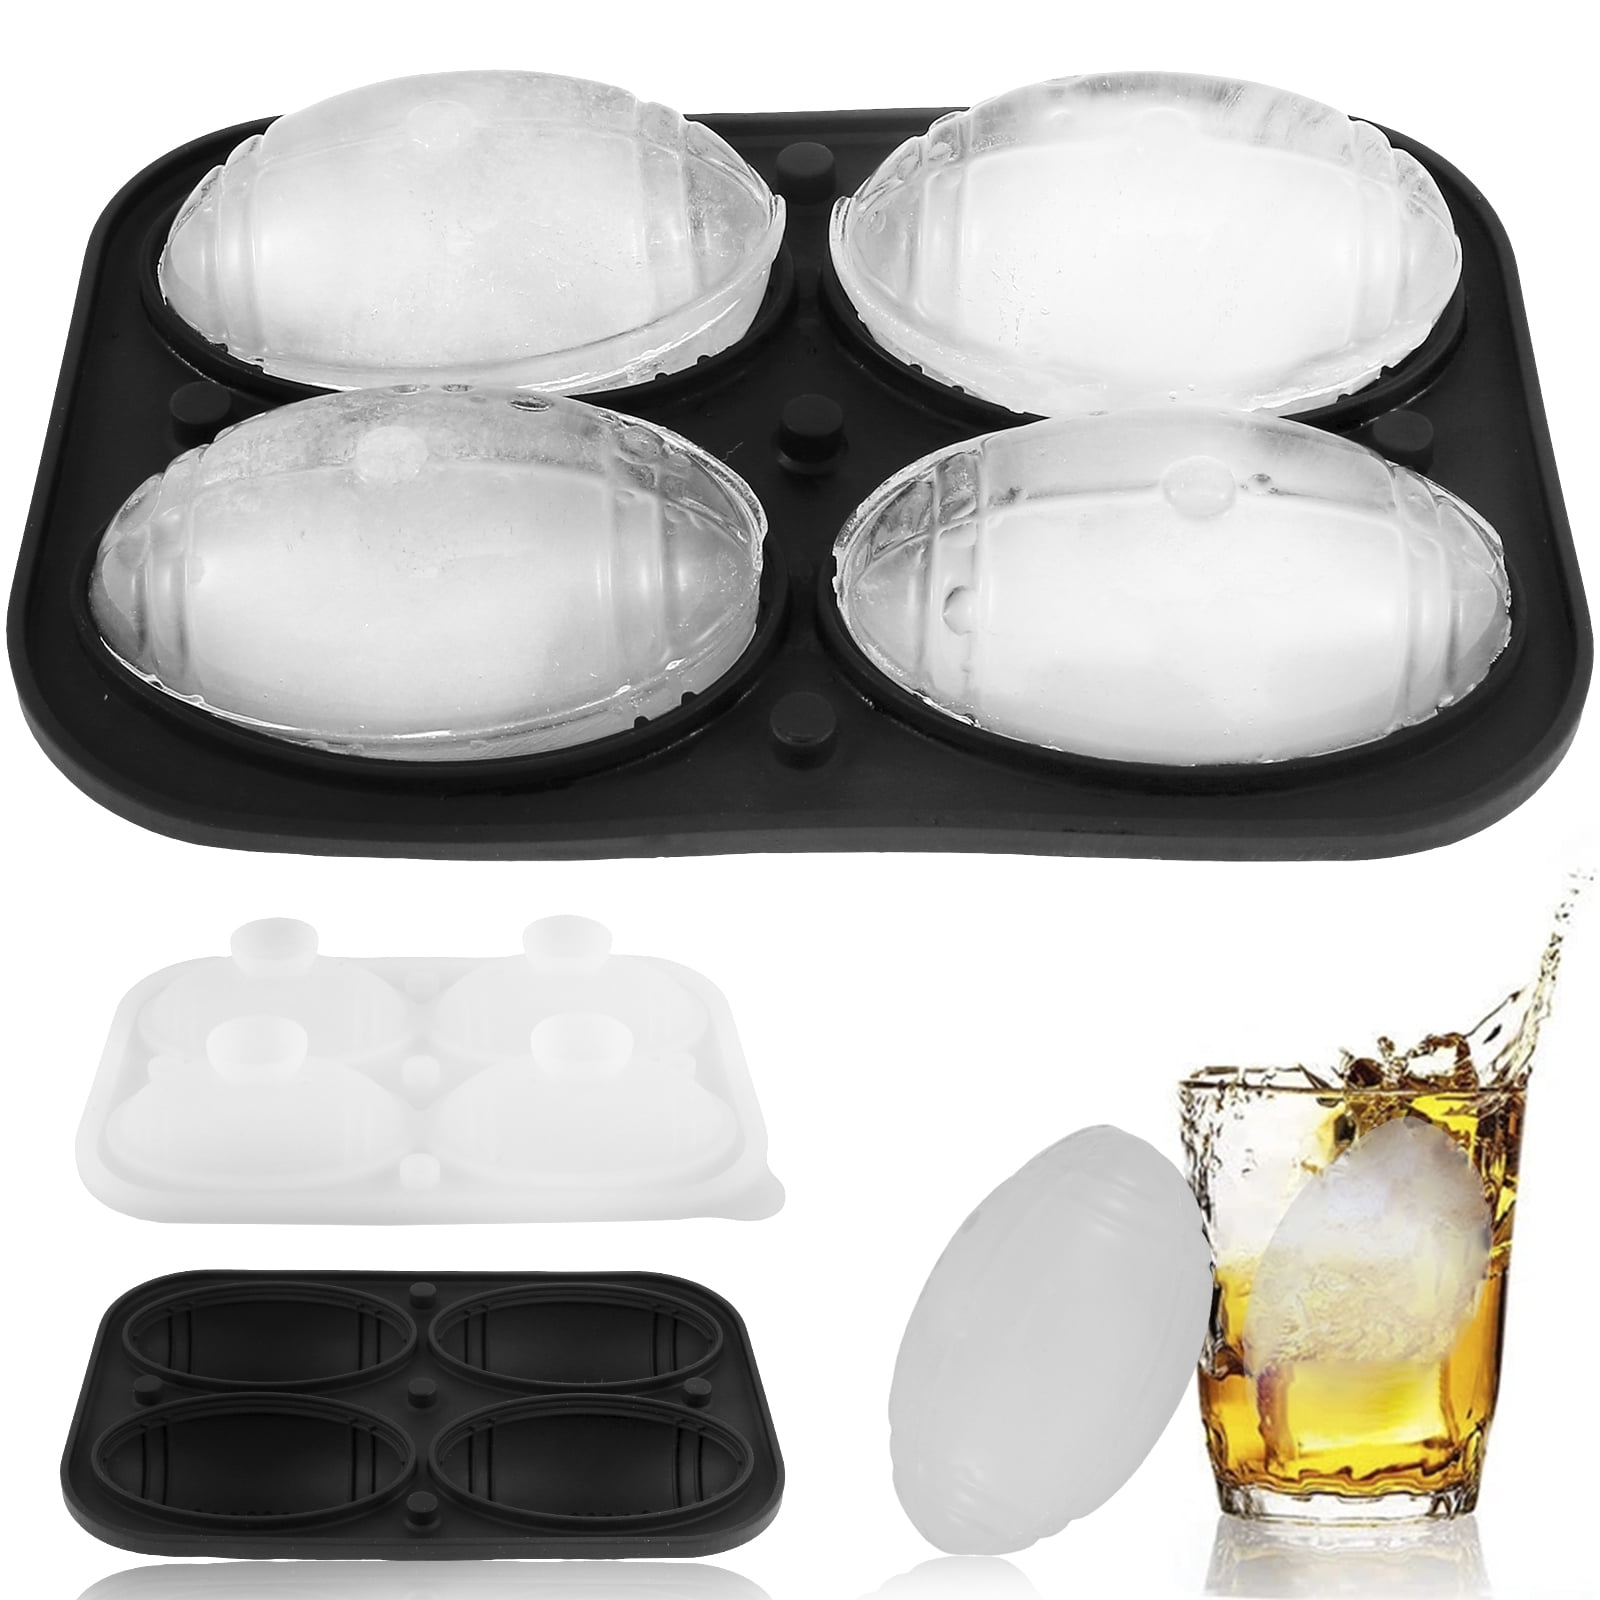  Webake Golf Ball Ice Molds with Lid & Funnel, Golf Gifts Ball  Ice Maker for Cocktails, Whiskey, Bourbon Chilling, 6 Holes 1.6 Round Sphere  Ice Cube Trays: Home & Kitchen